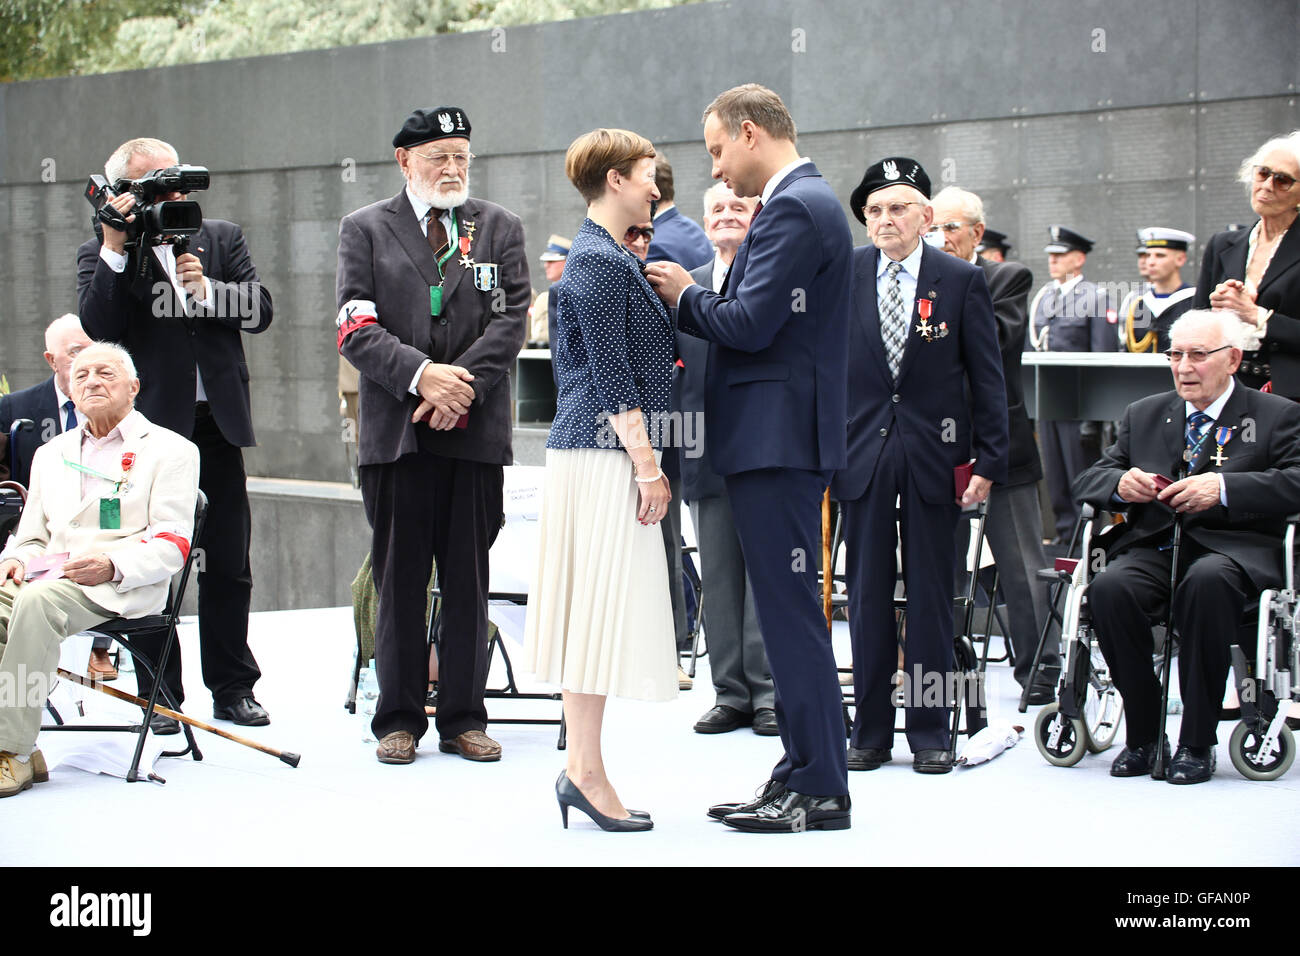 Warsaw, Poland. 30th July, 2016. President Andrzej Duda held speech at 72nd anniversary of the Warsaw rising of 1944 at the Warsaw Rising Museum. Participants of the rising of 1944 are honoured with state awards. Credit:  Jake Ratz/Alamy Live News Stock Photo